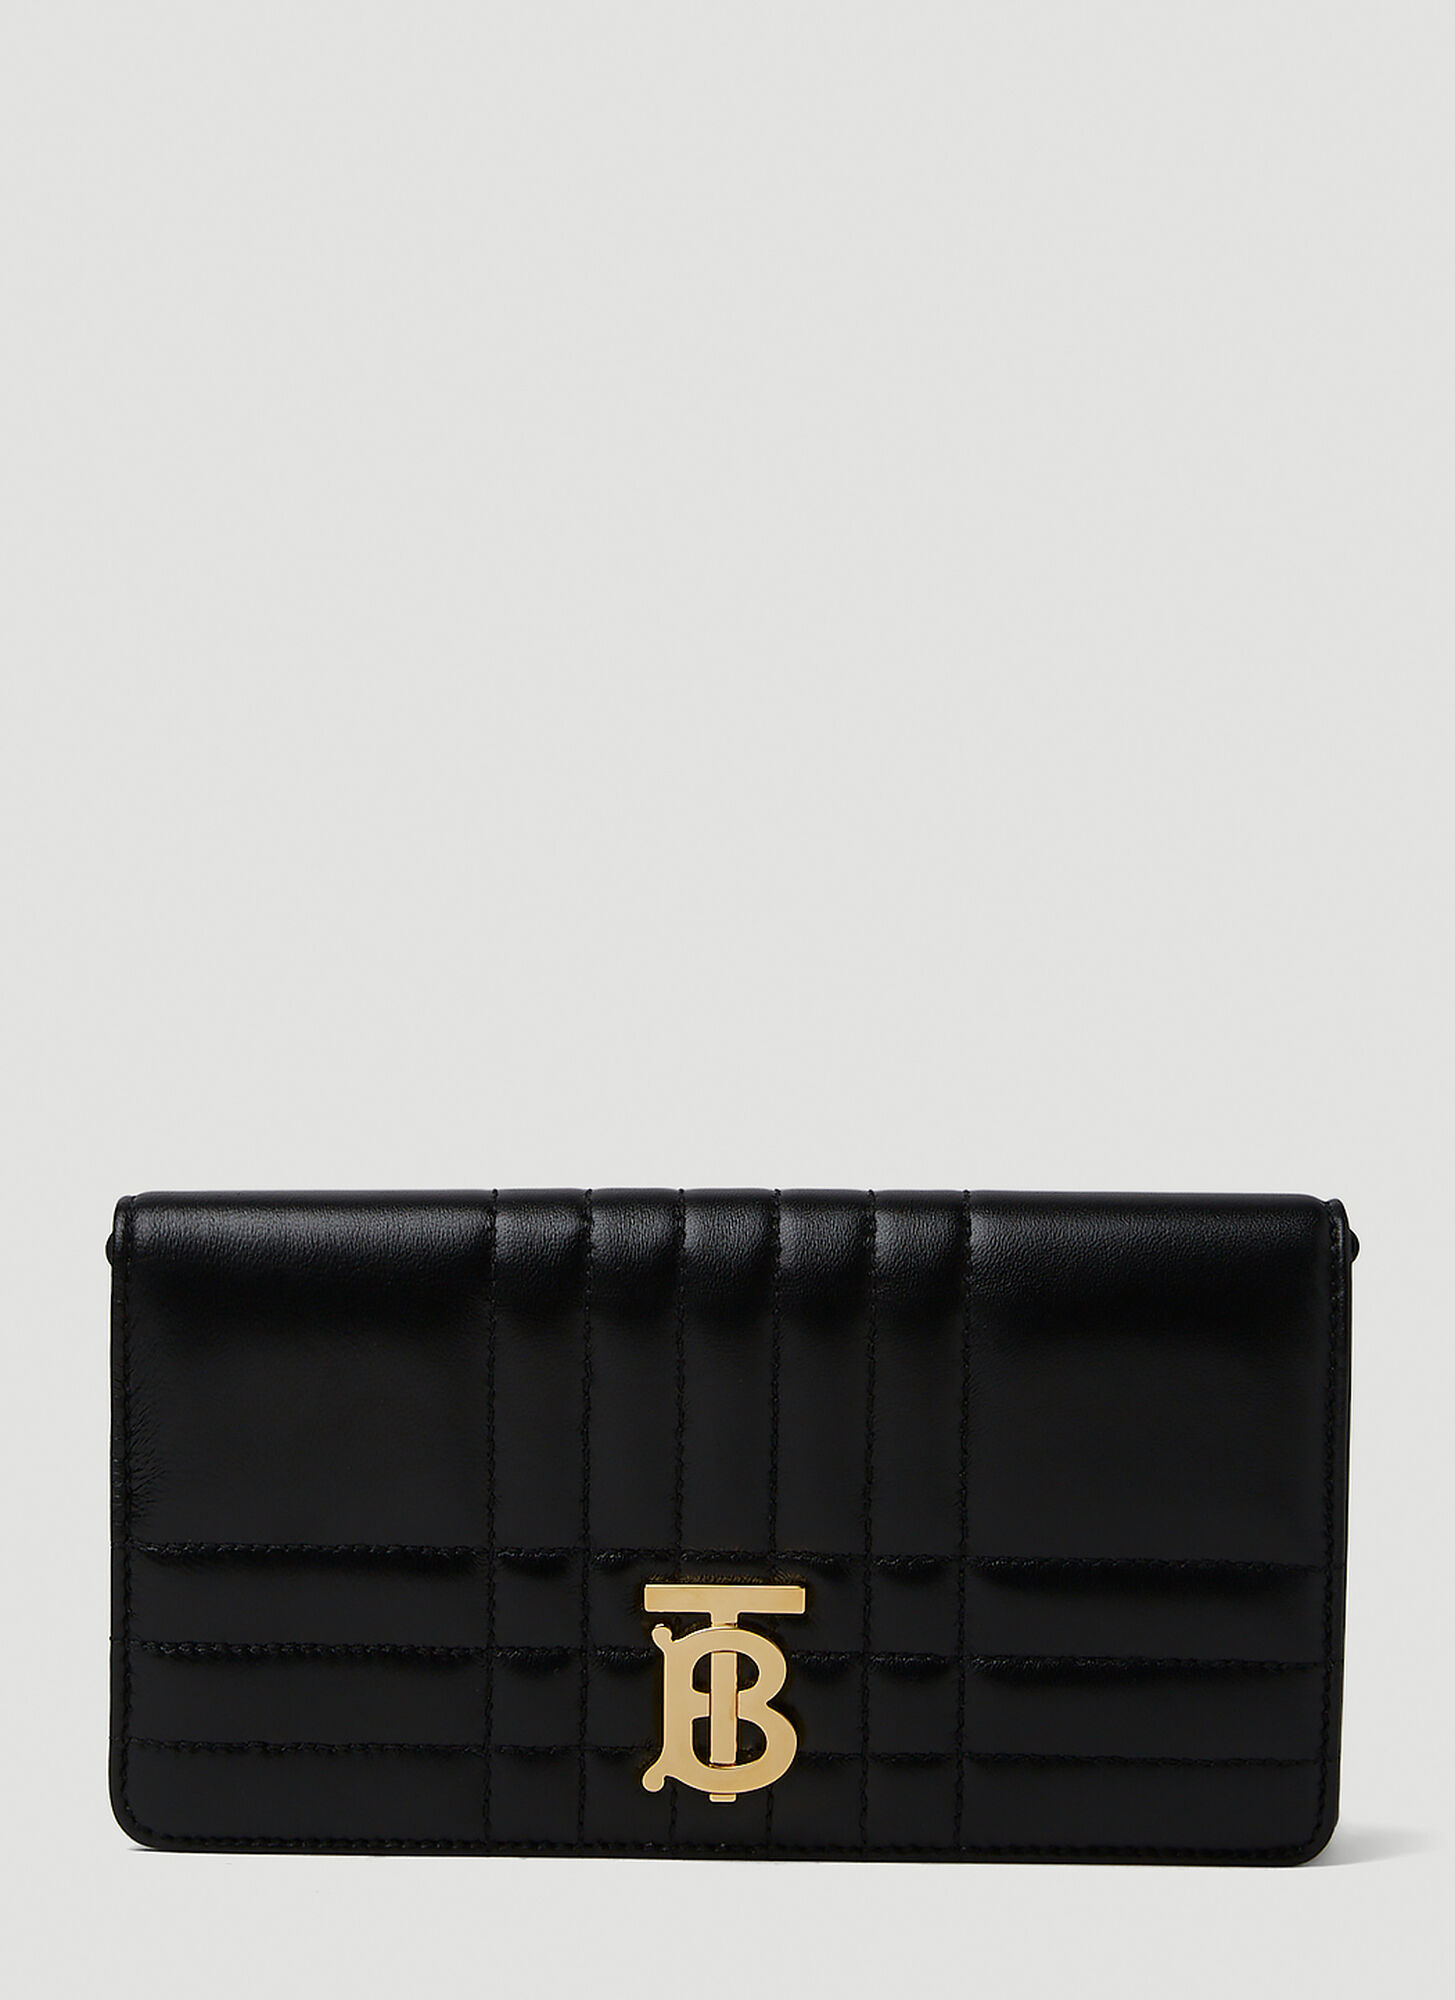 Burberry Leather Lola Chain Wallet In Black / Light Gold